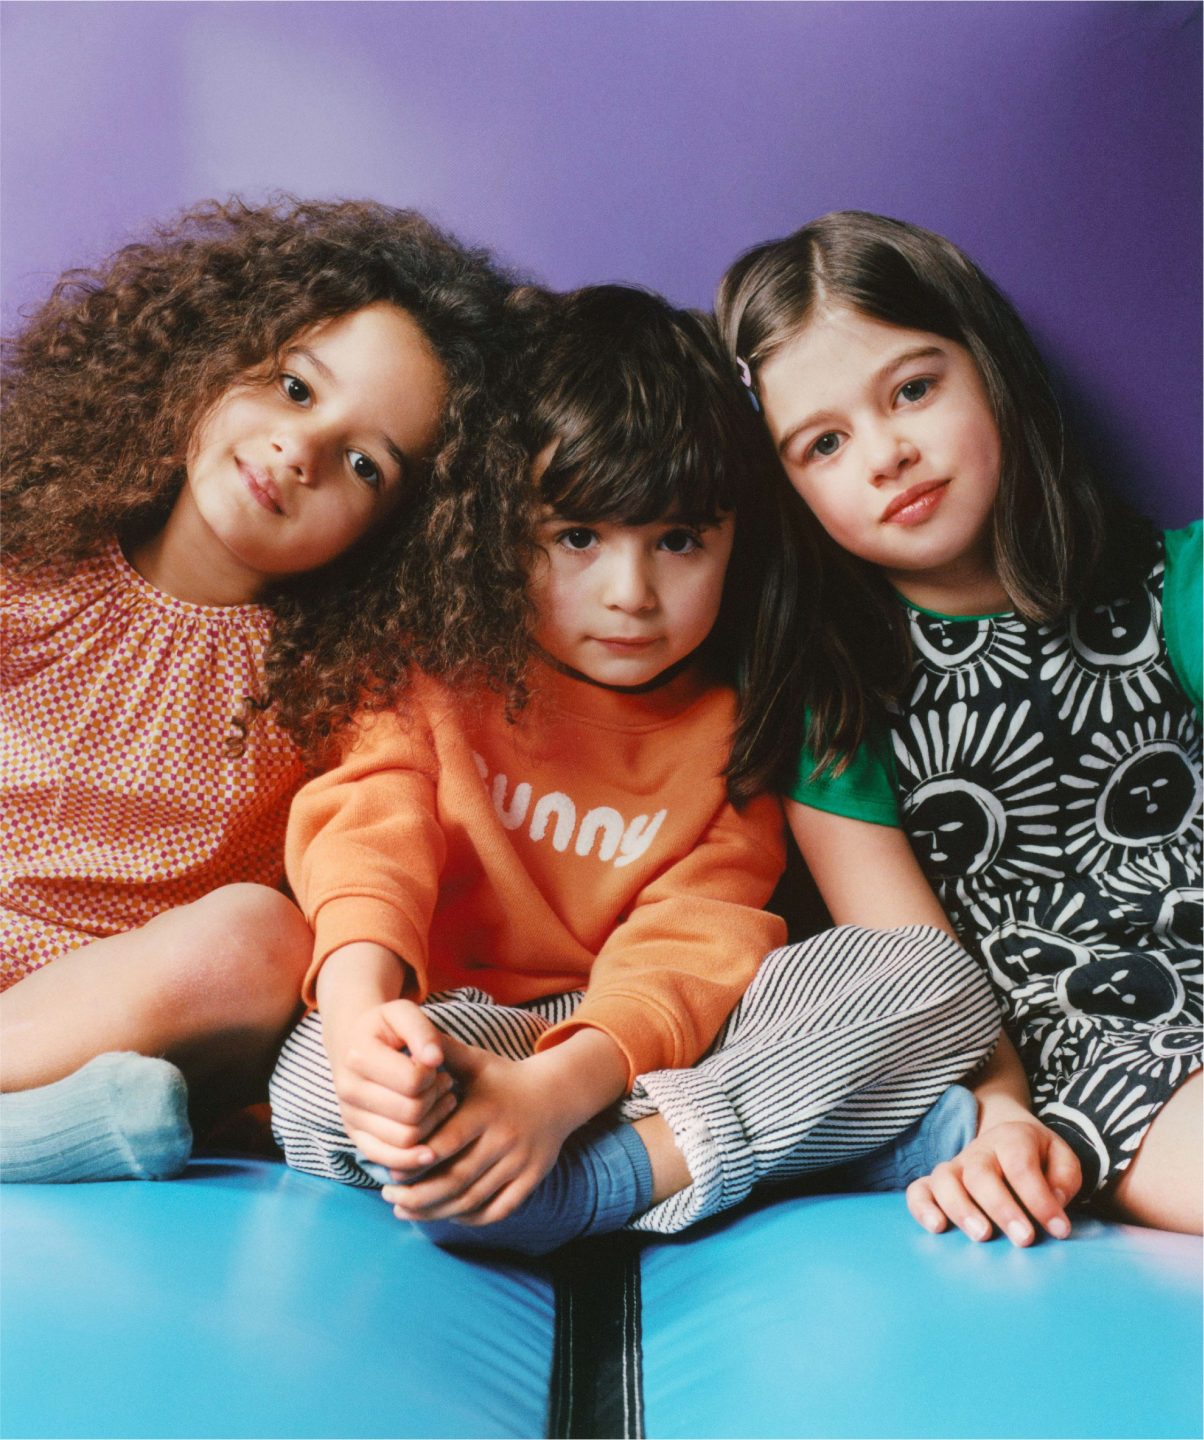 Optimistic, vibrant and energetic, Whistles Kids Spring